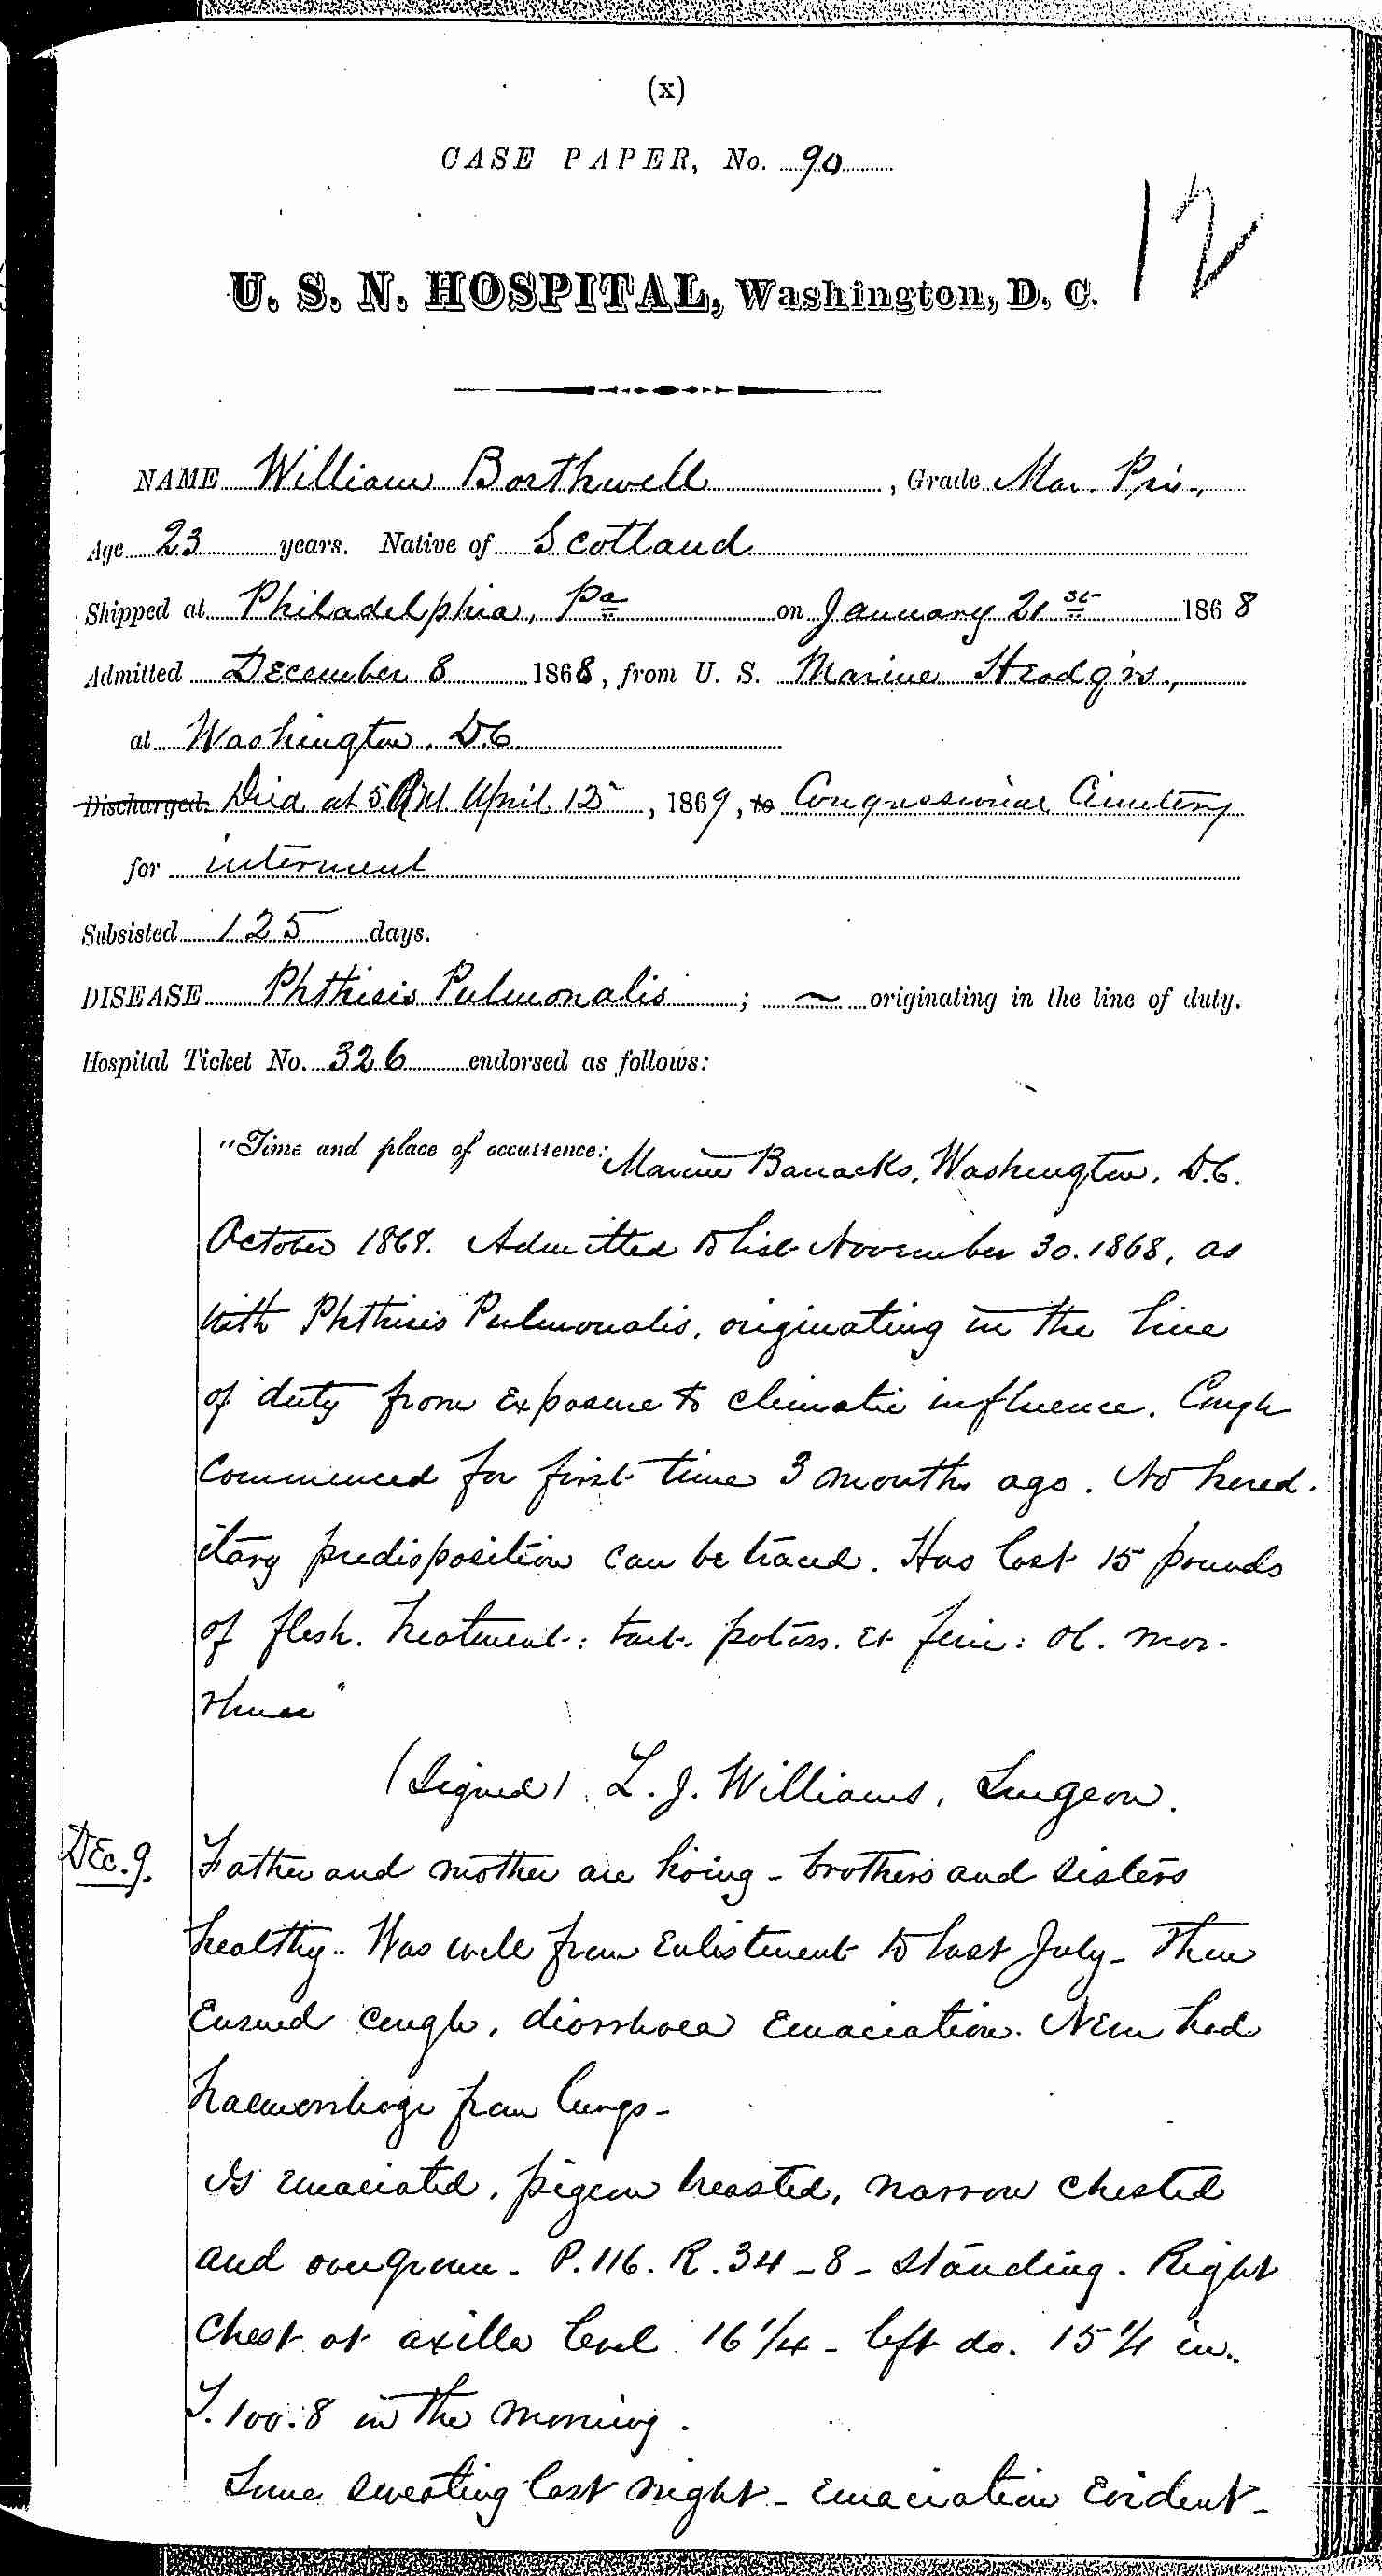 Entry for William Bathwell (page 1 of 13) in the log Hospital Tickets and Case Papers - Naval Hospital - Washington, D.C. - 1868-69